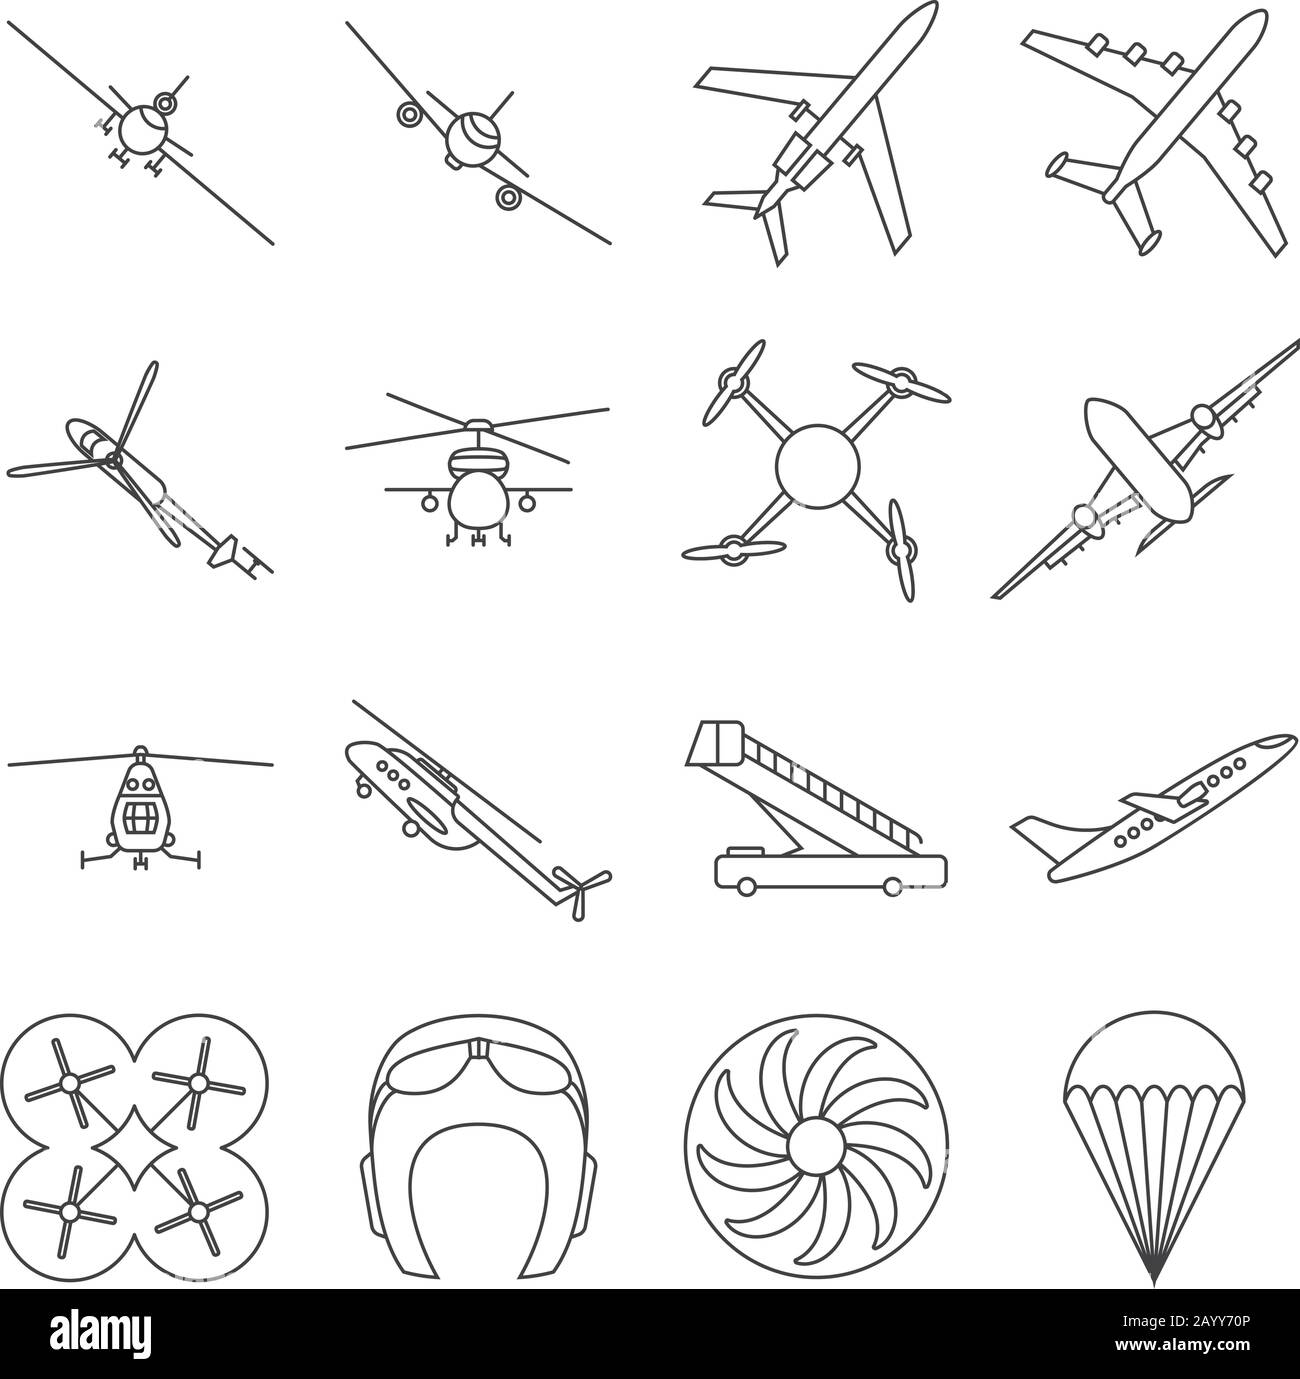 Aviation thin line vector icons set. Airplane in linear style, illustration of aviation transport airplanes and helicopter Stock Vector